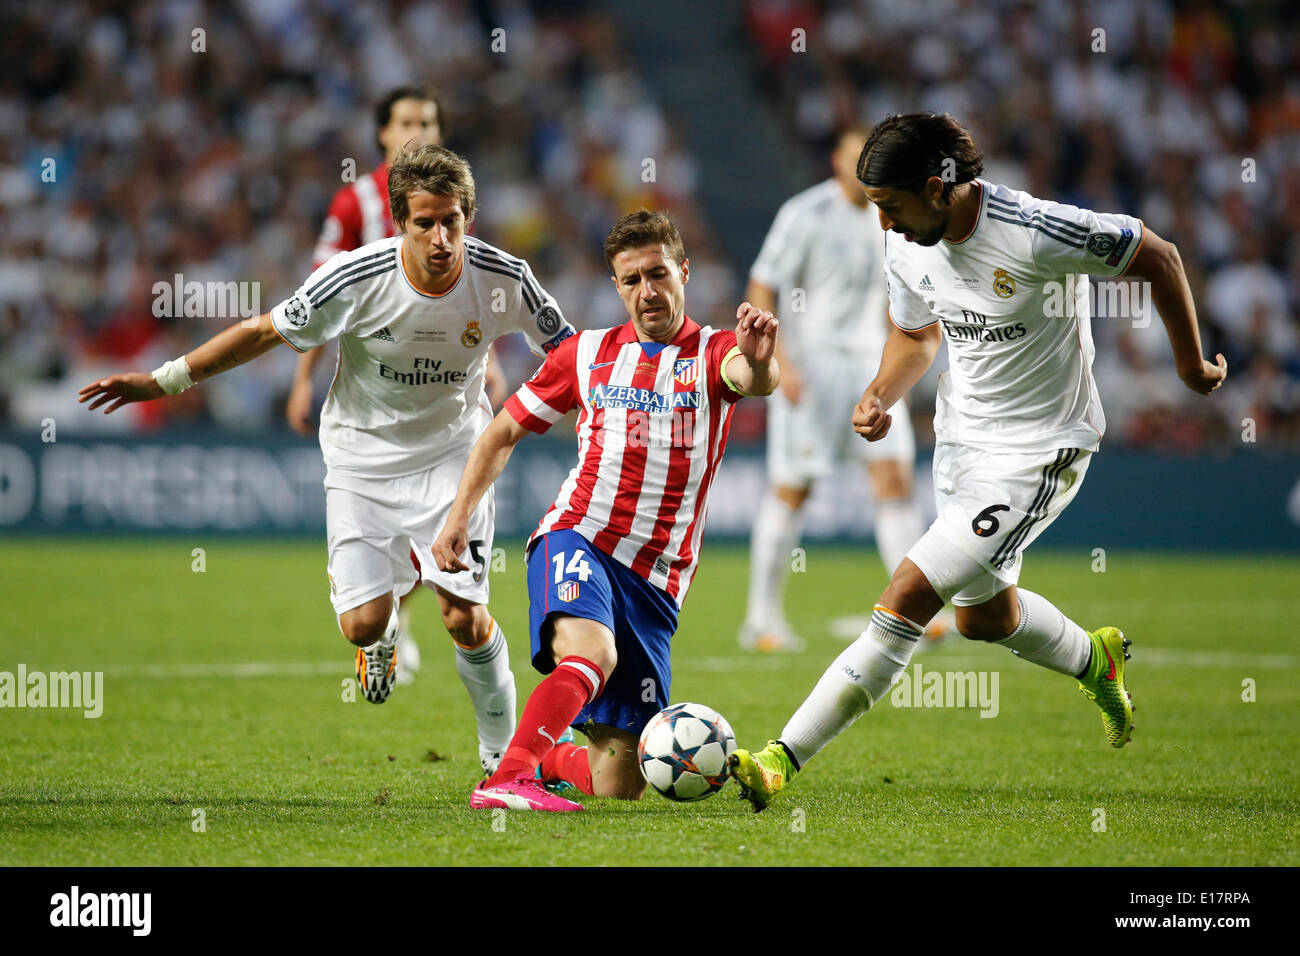 Fabio Coentrao (Real Madrid CF #5) and Sami Khedira (Real Madrid CF #6) tackling against Gabi (Atletico Madrid #14) during the final of the Champions league between Real Madrid and Atletico Madrid, Estadio da Luz in Lisbon on May 24., 2014. Stock Photo